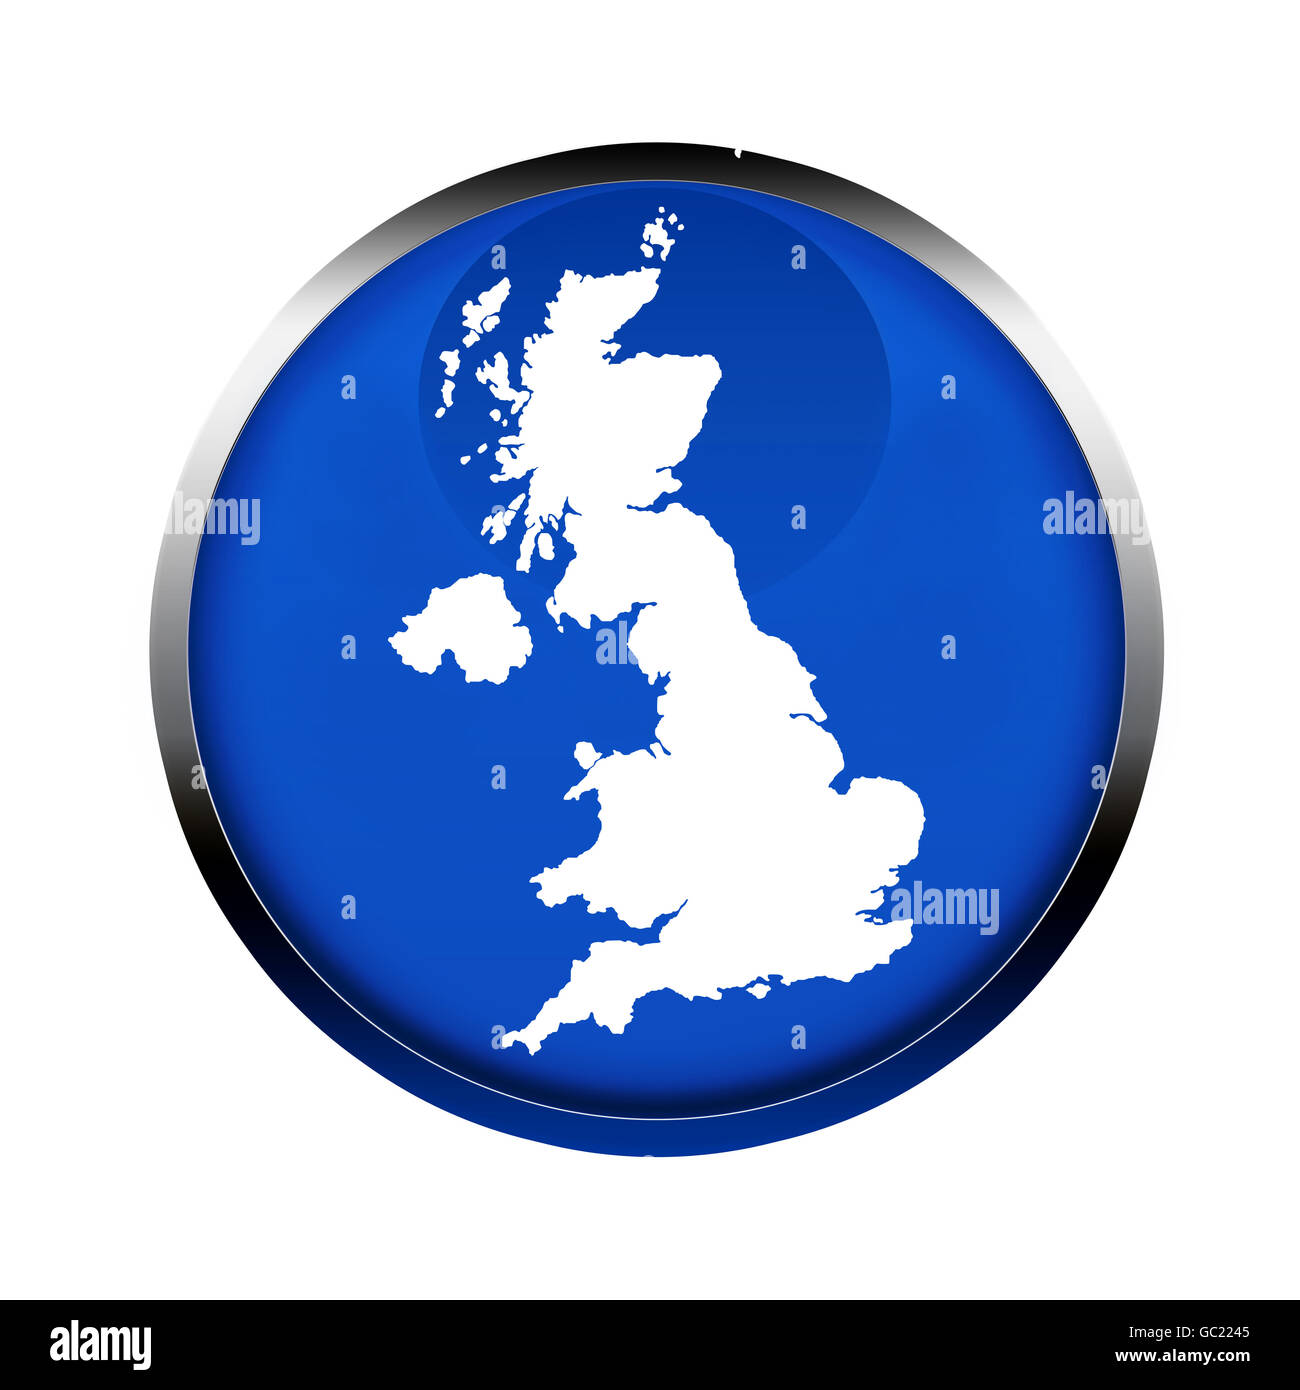 United Kingdom map button in the colors of the European Union. Stock Photo